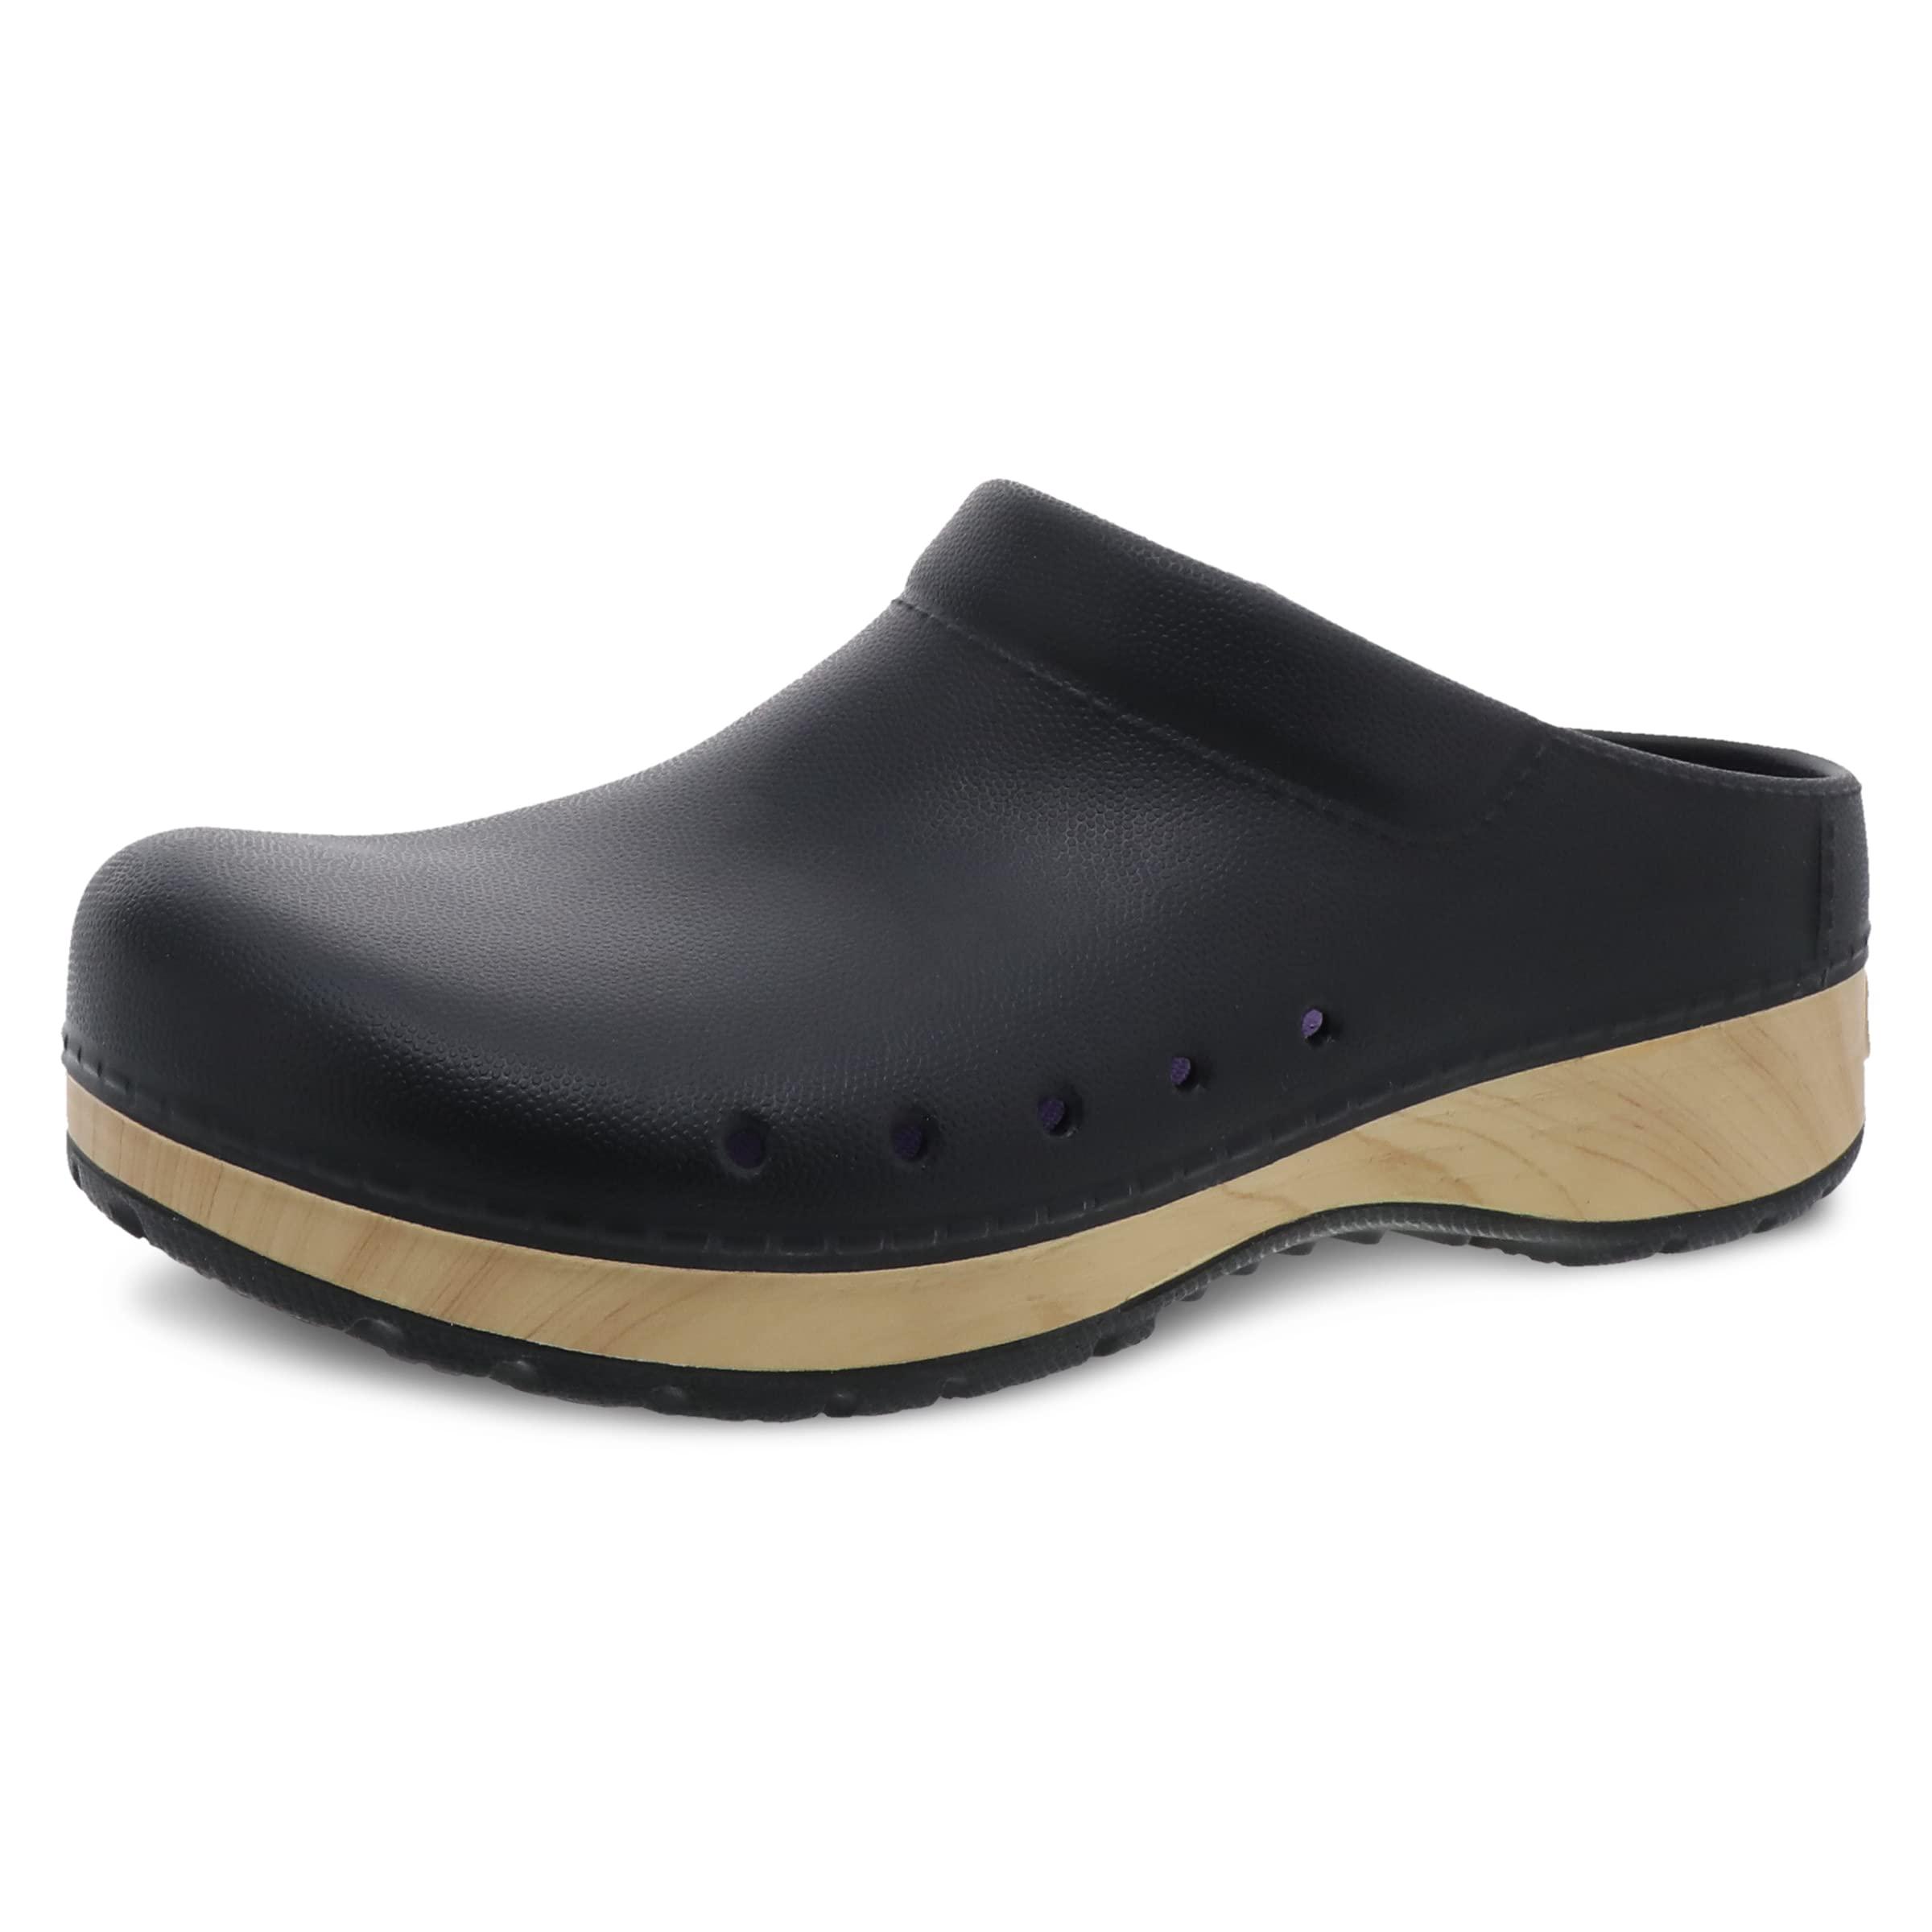 Dansko On Mule Clog For – Lightweight Cushioned Comfort And Removable ...